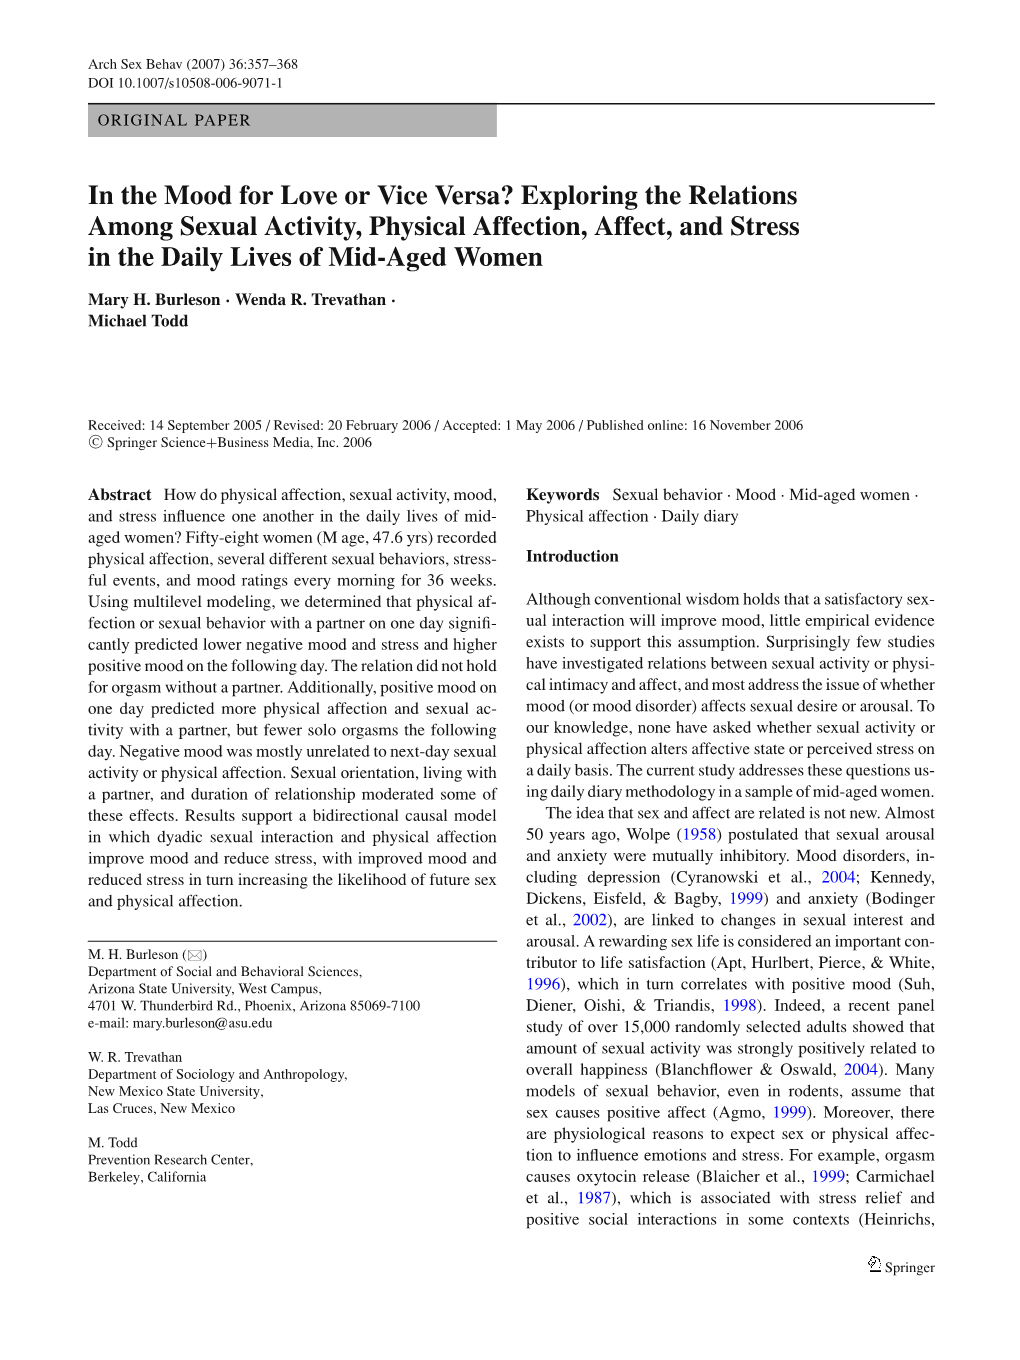 Exploring the Relations Among Sexual Activity, Physical Affection, Affect, and Stress in the Daily Lives of Mid-Aged Women